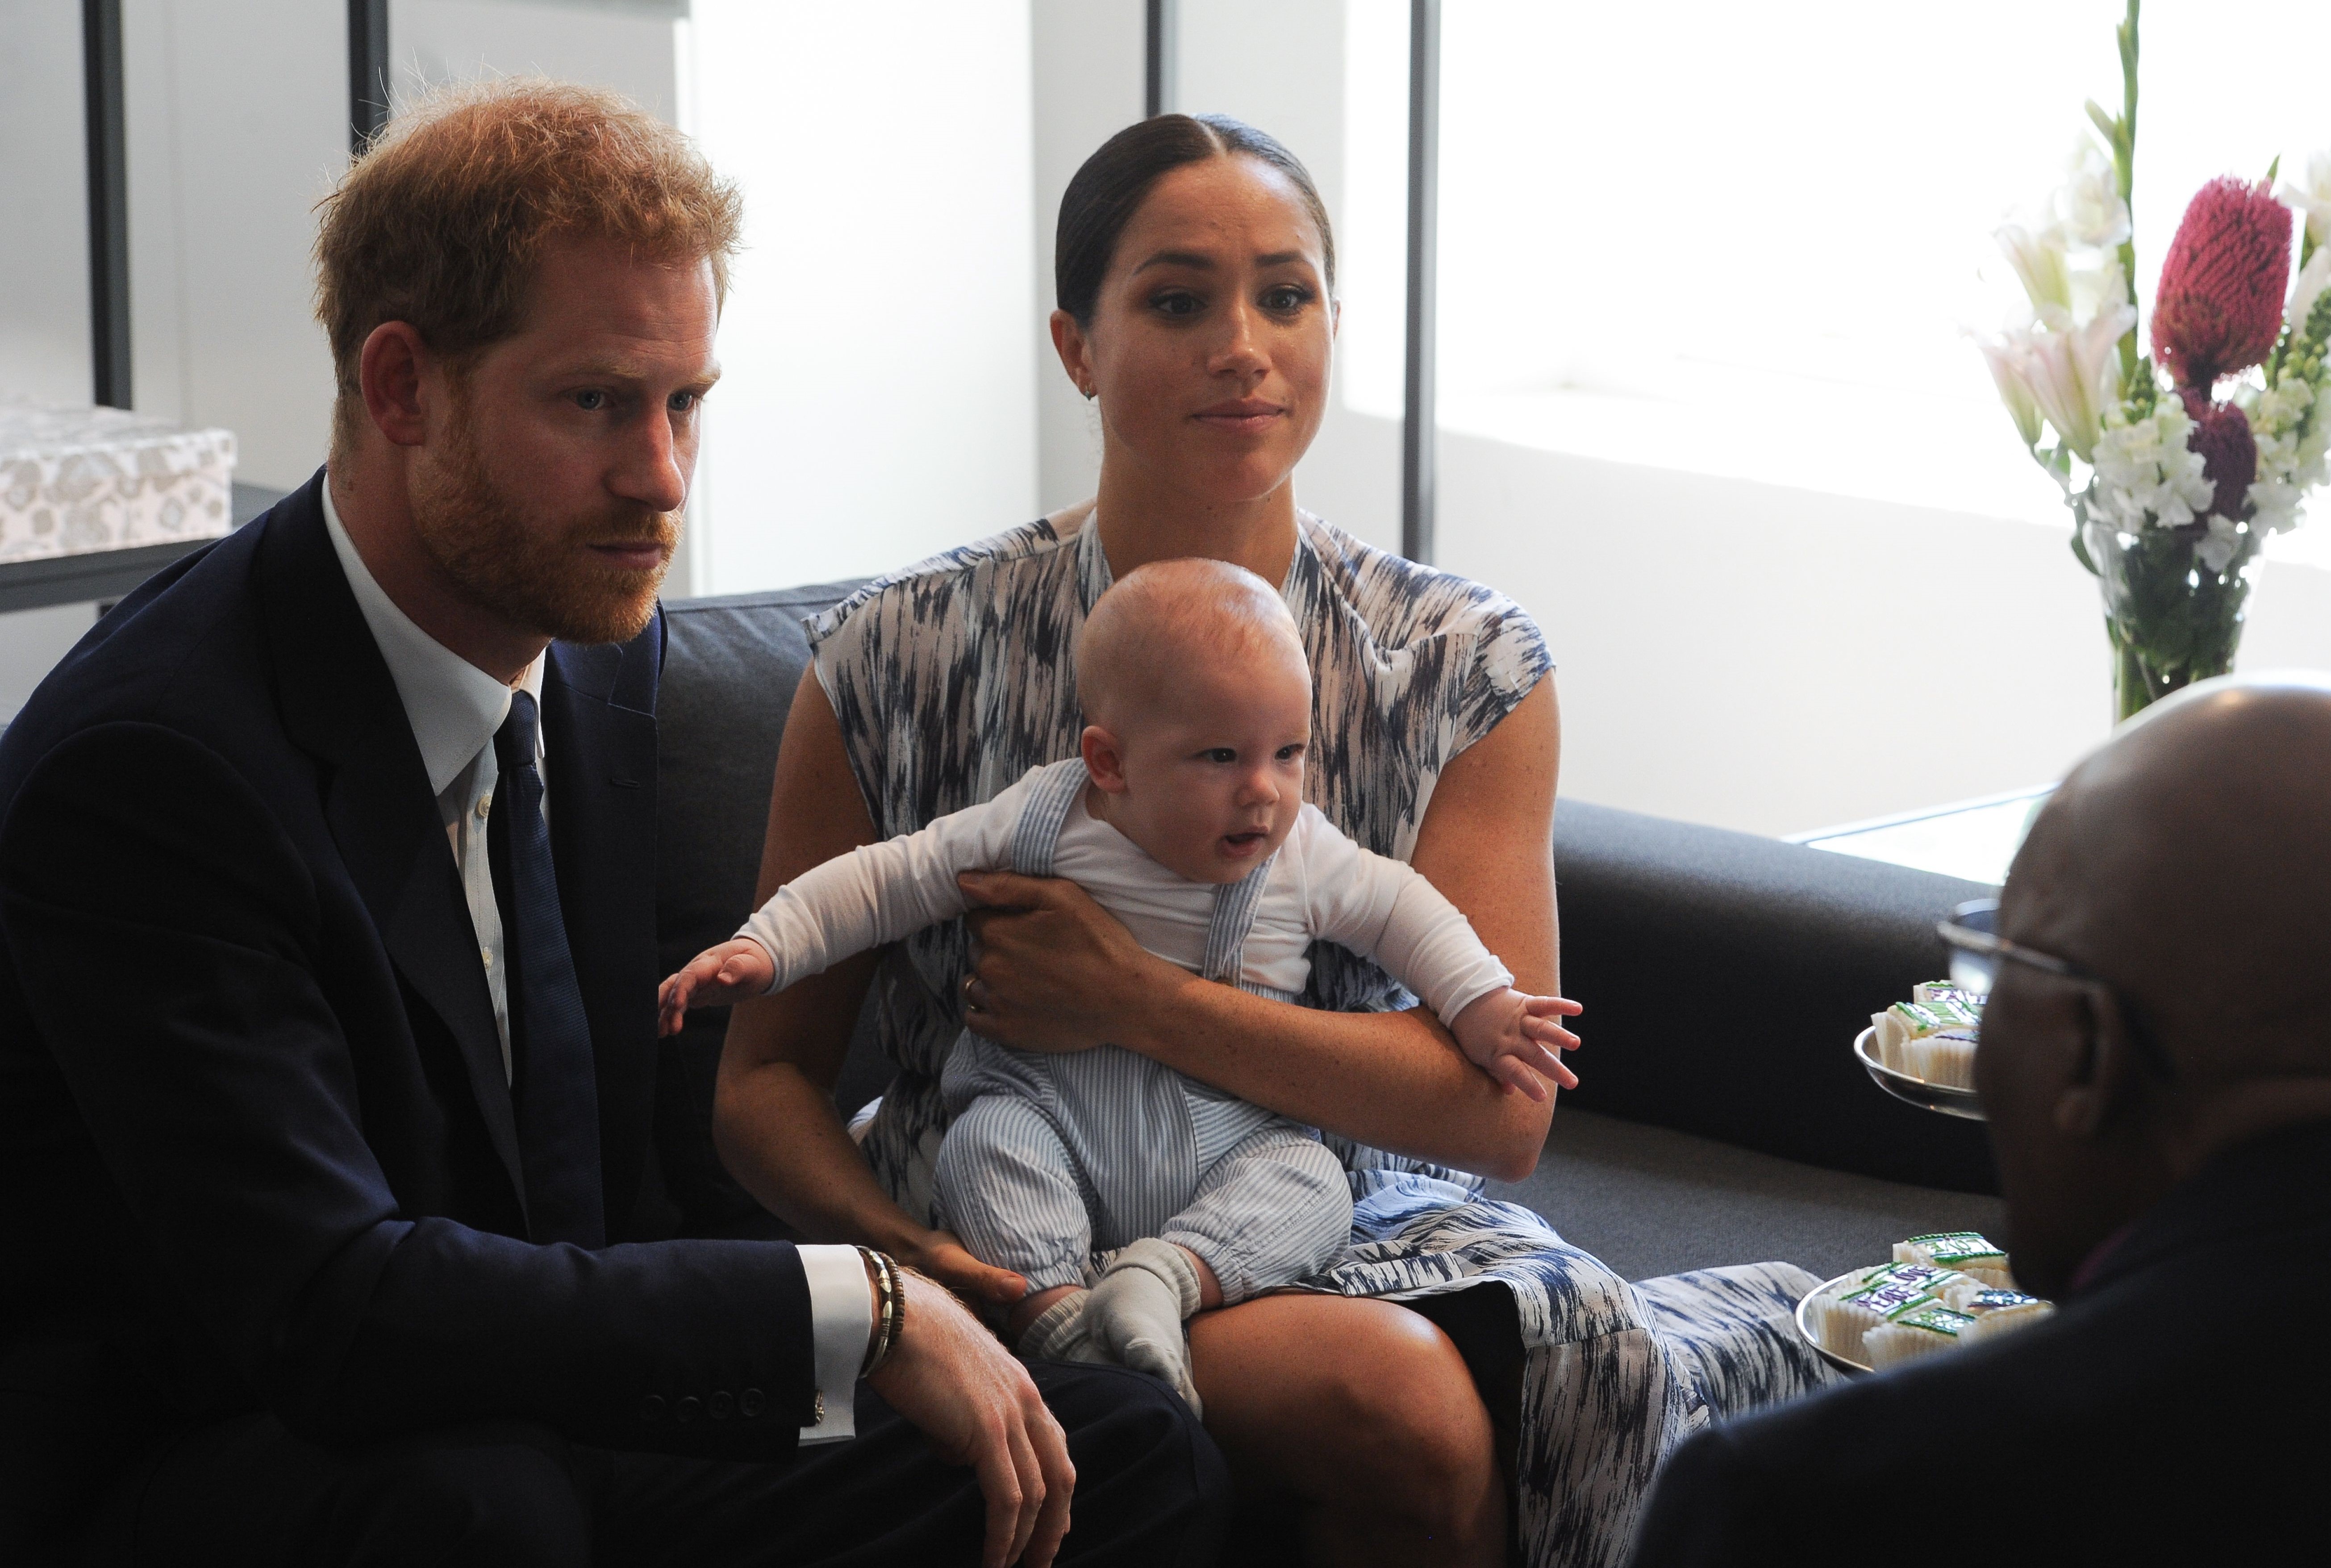 Prince Harry and Meghan Markle holding their son, Archie, on her lap during a meeting with Archbishop Desmond Tutu in Cape Town